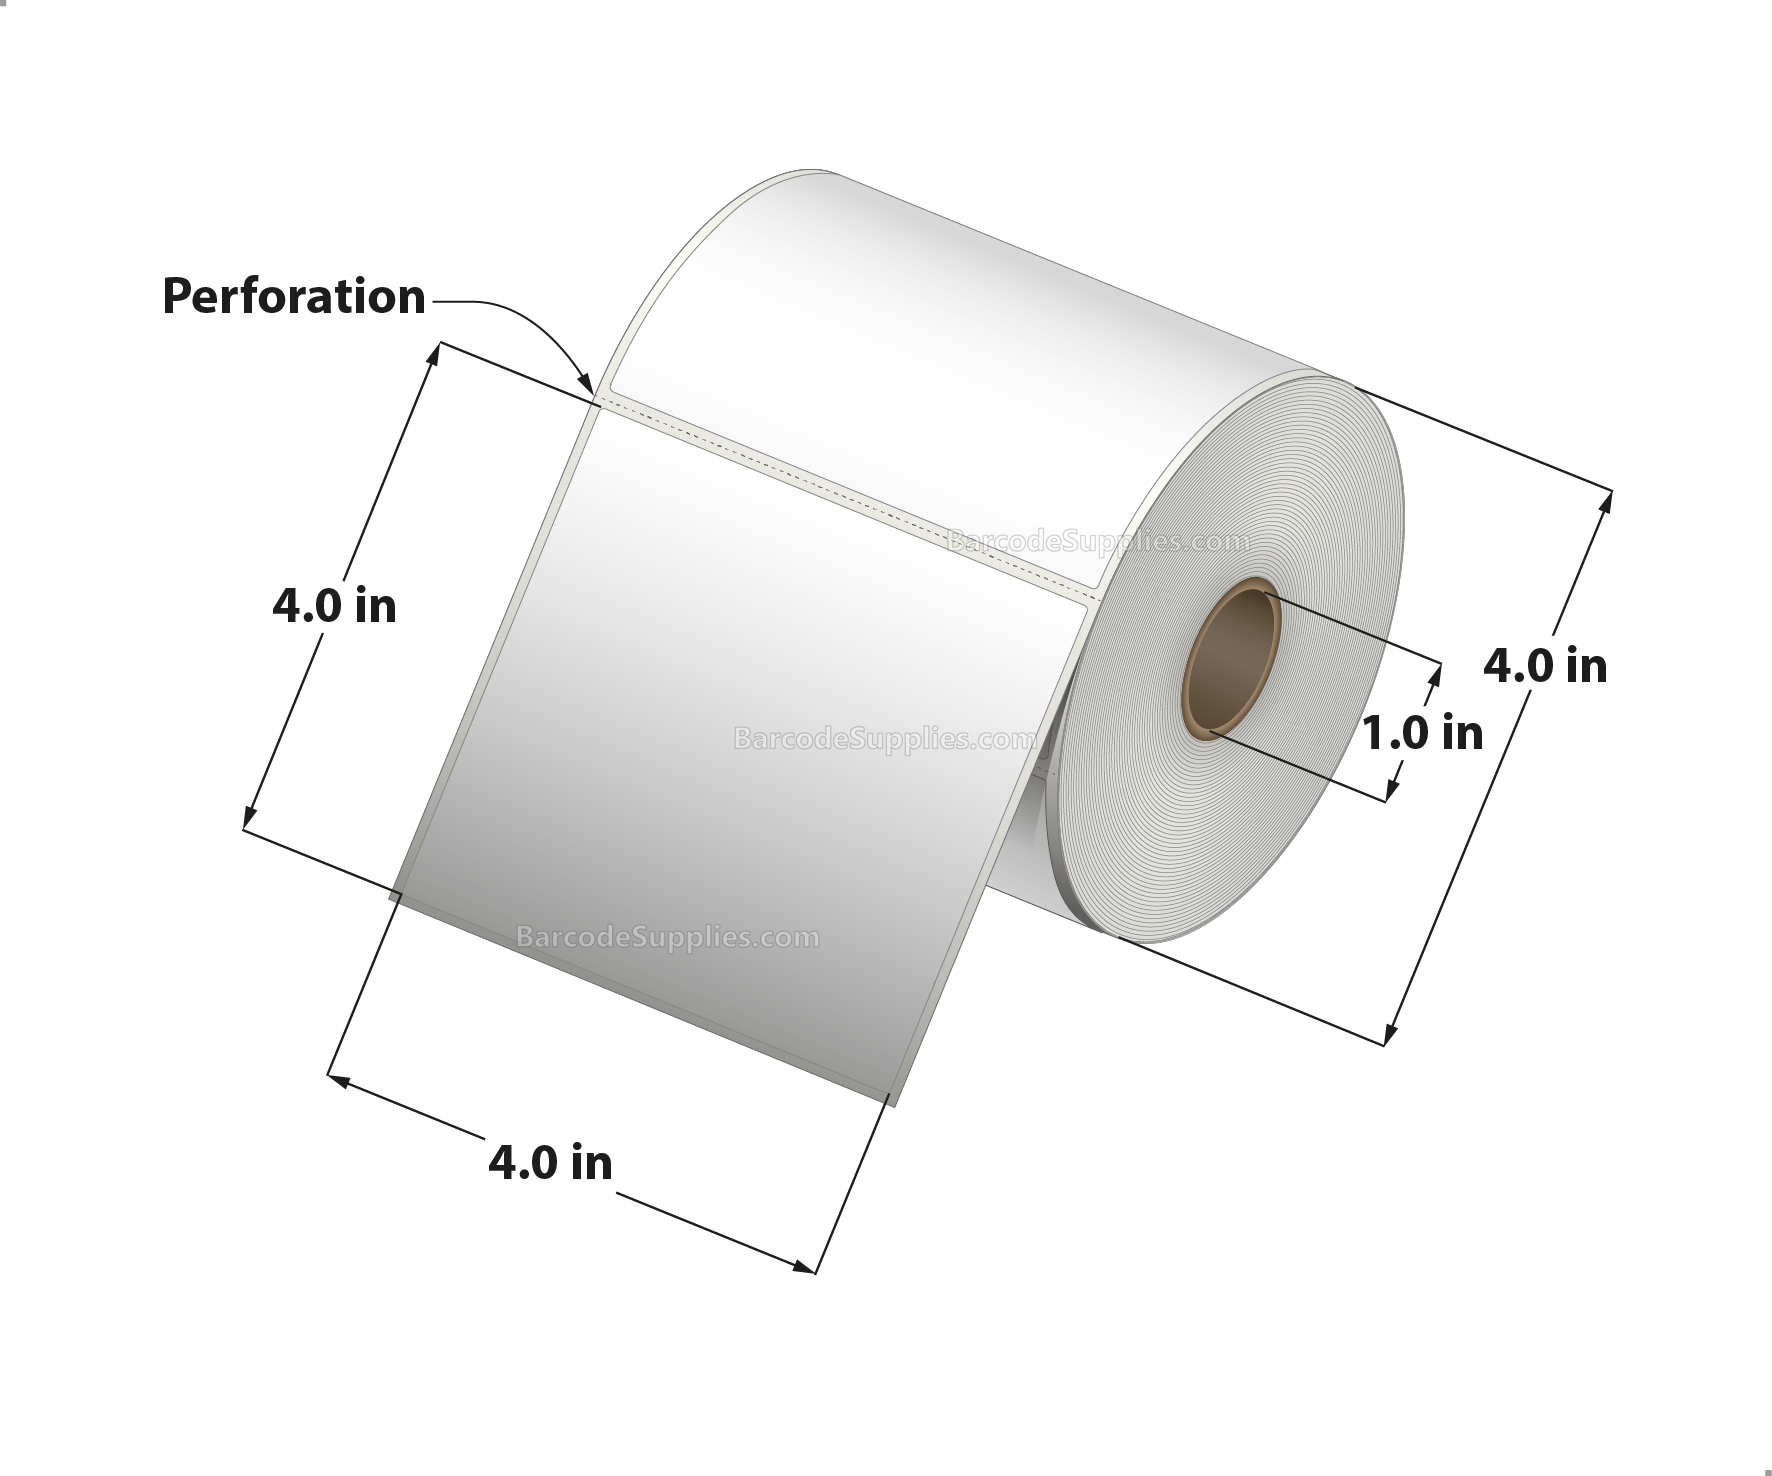 4 x 4 Direct Thermal White Labels With Rubber Adhesive - Perforated - 377 Labels Per Roll - Carton Of 12 Rolls - 4524 Labels Total - MPN: RDT4-400400-1P